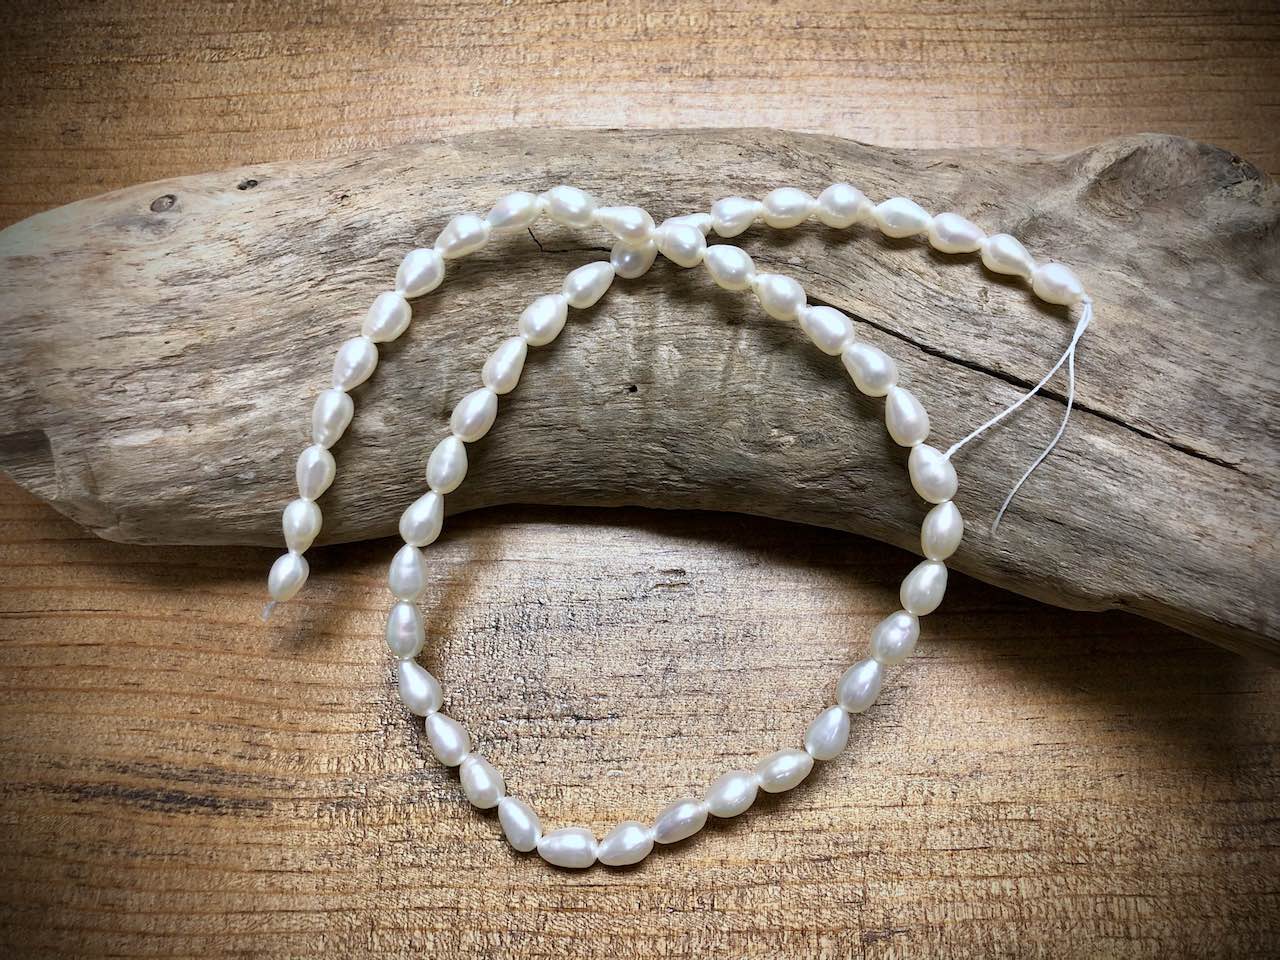 Old-Stock, Vintage Freshwater Pearls - 7-8mm x 6mm - 16”